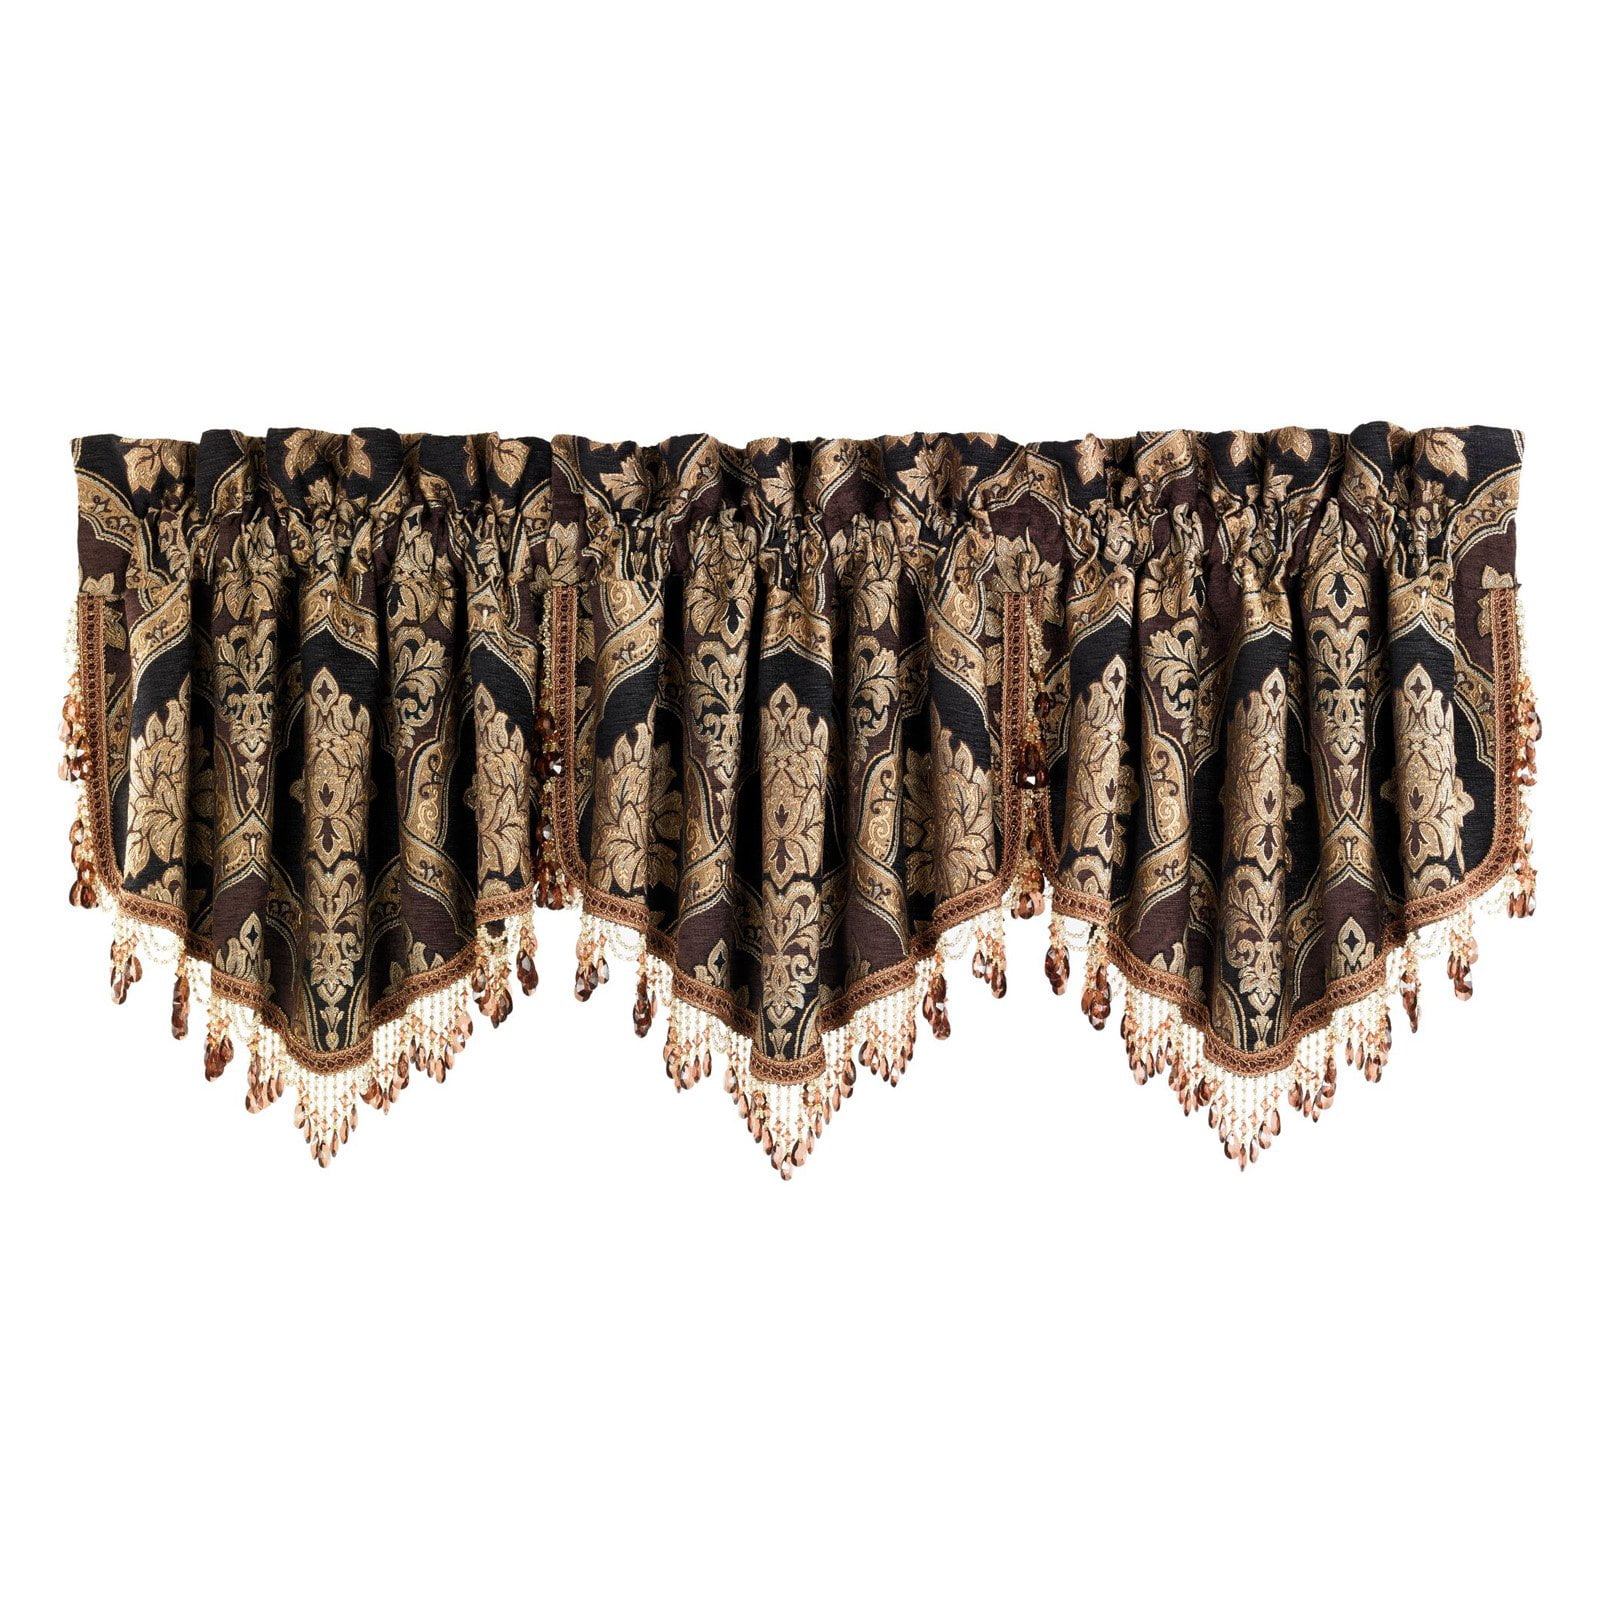 Details about   Royal Velvet Kathryn Rounded Ascot Valance 50 W x 19 L Seed Pearl 